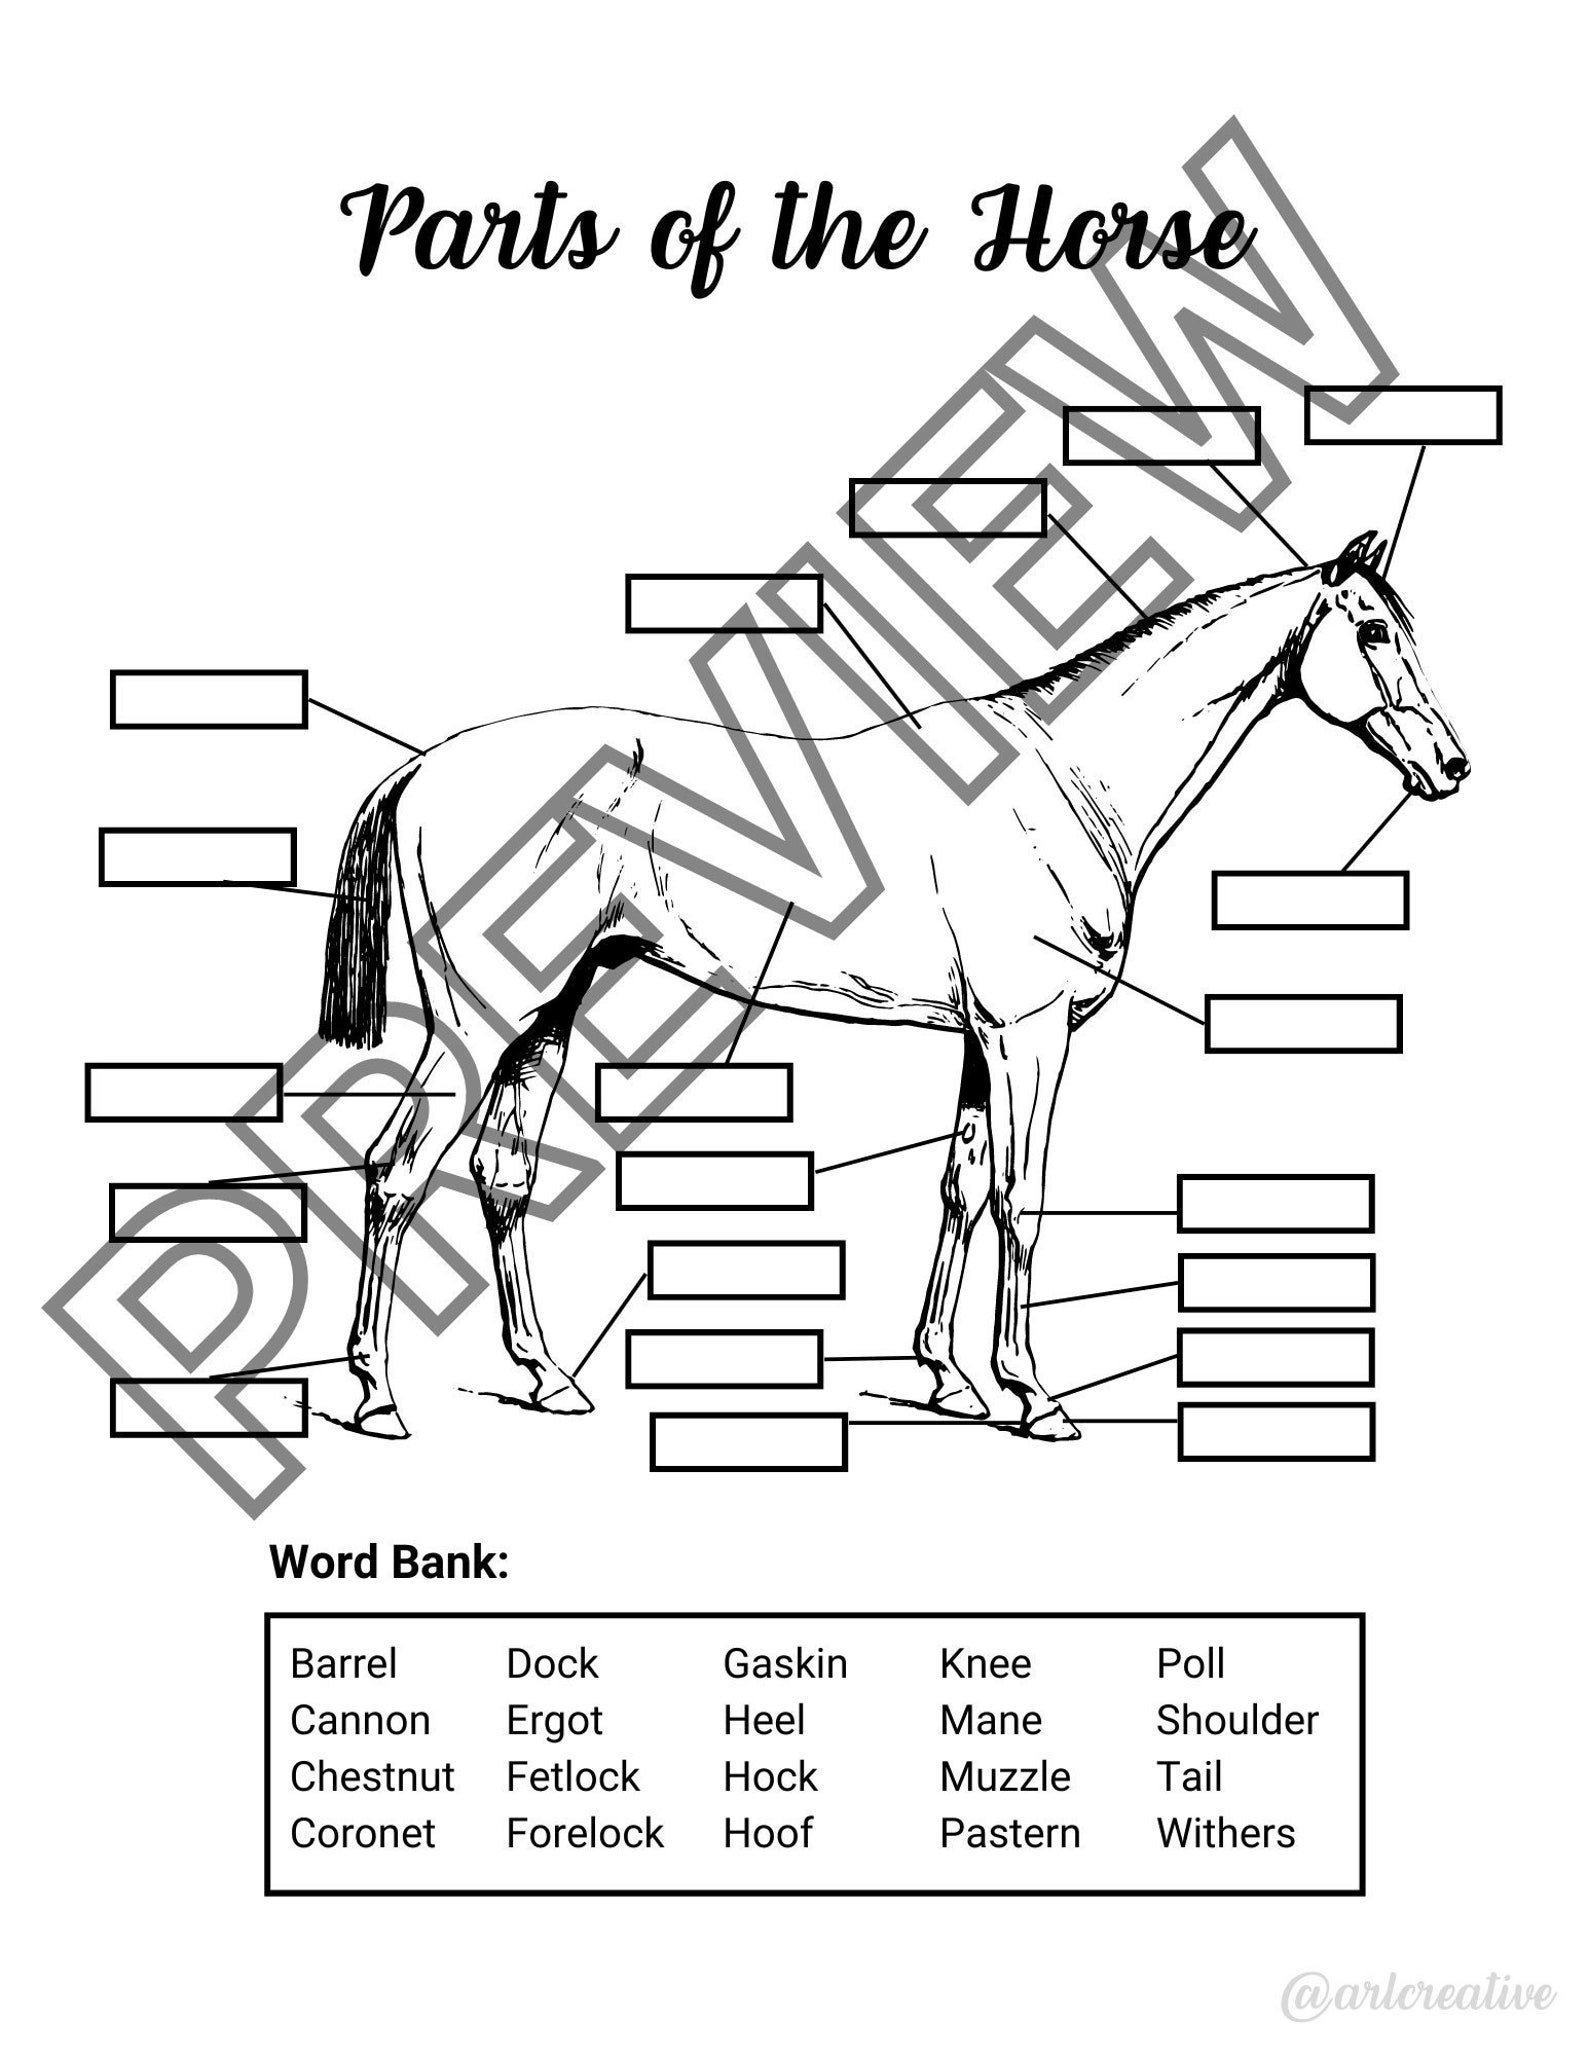 Parts of the Horse Worksheet - Etsy